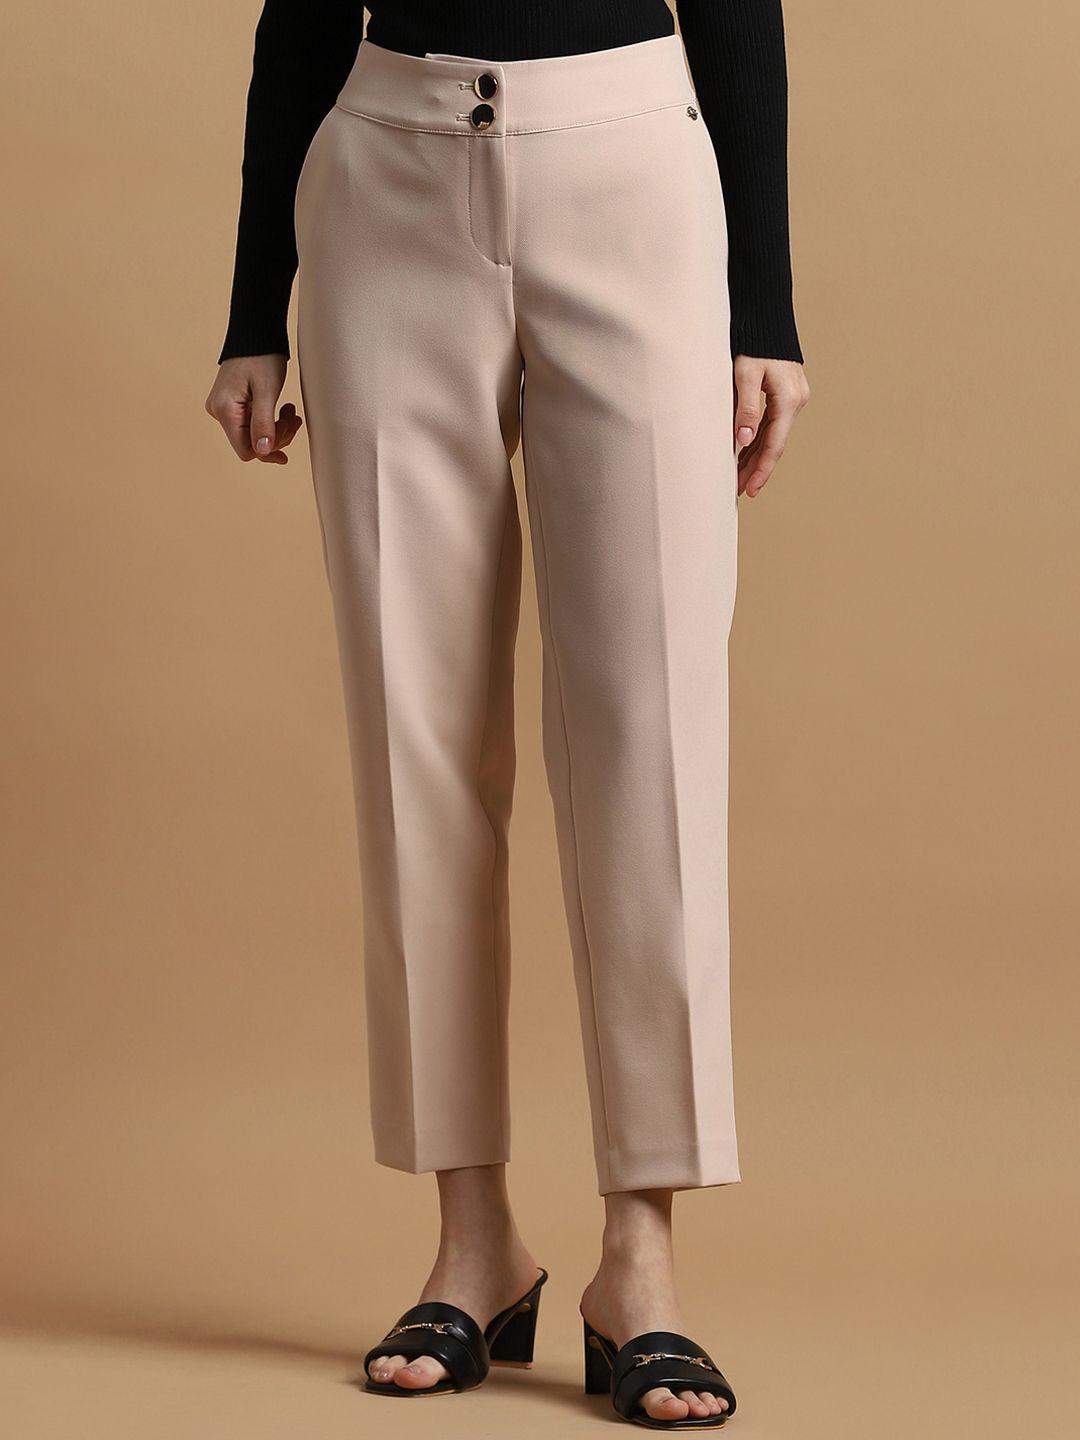 allen solly woman mid rise slim fit cotton formal trousers